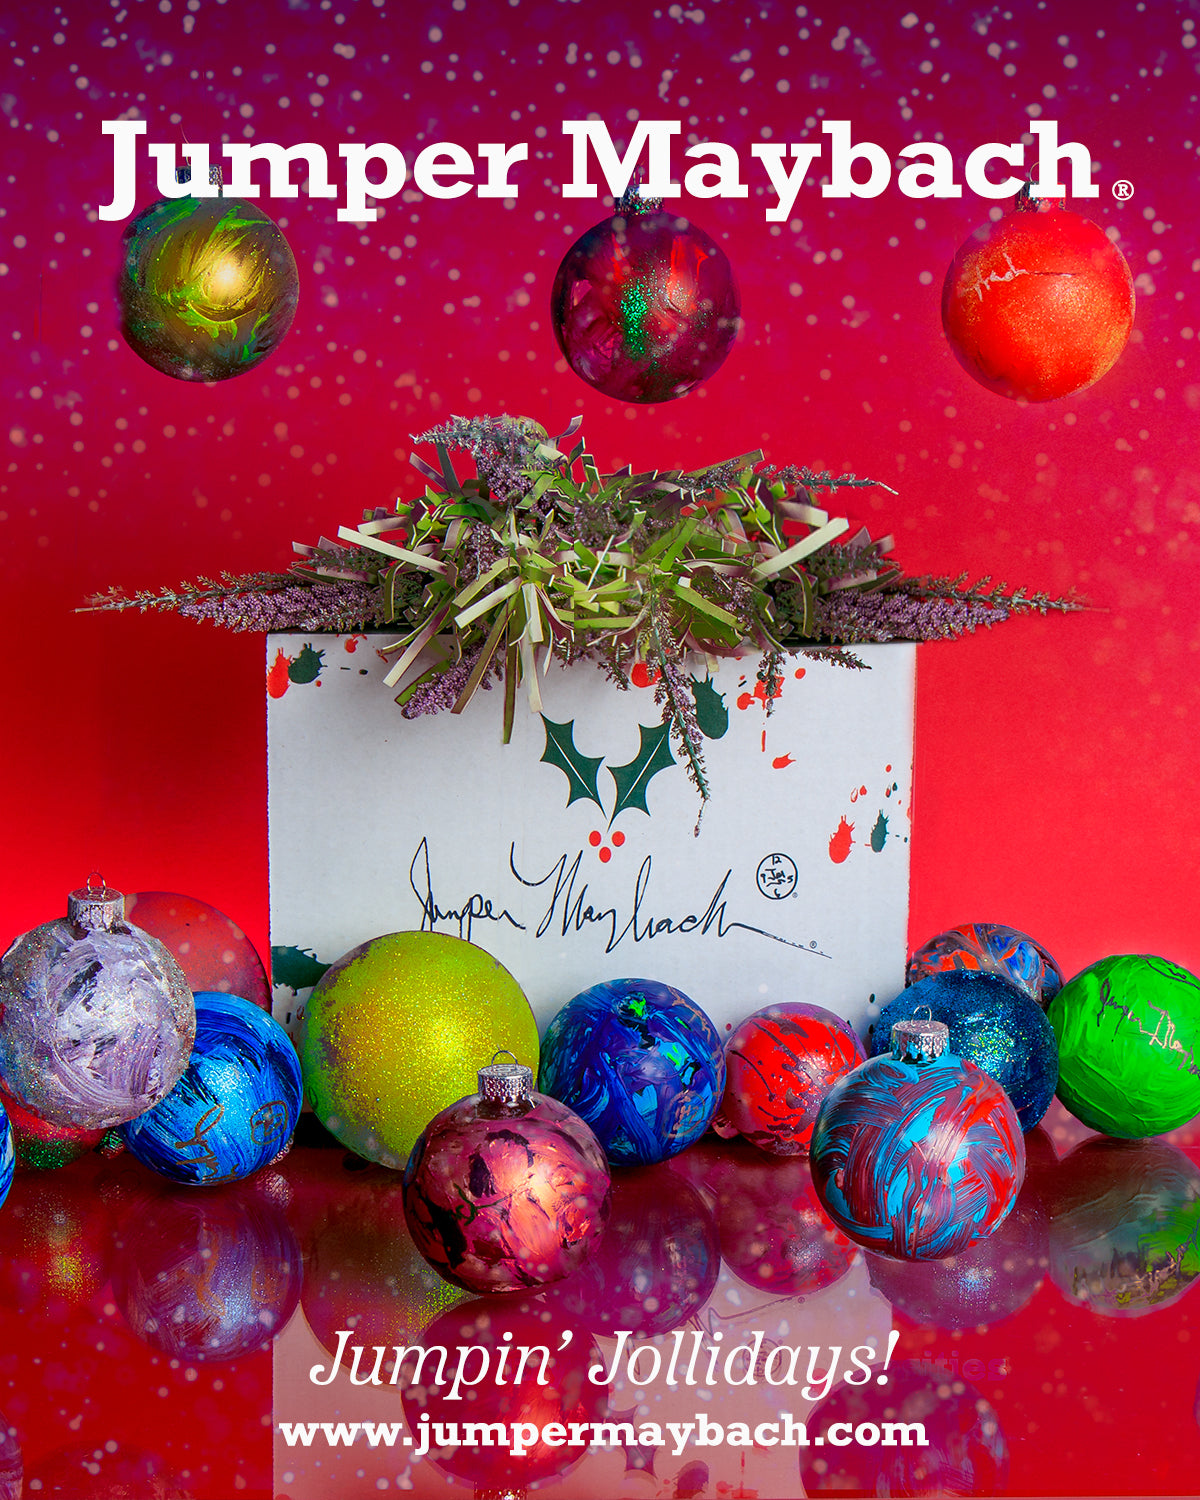 Buy 3 Get One Free SMALL Jumpin Jolliday Ornaments